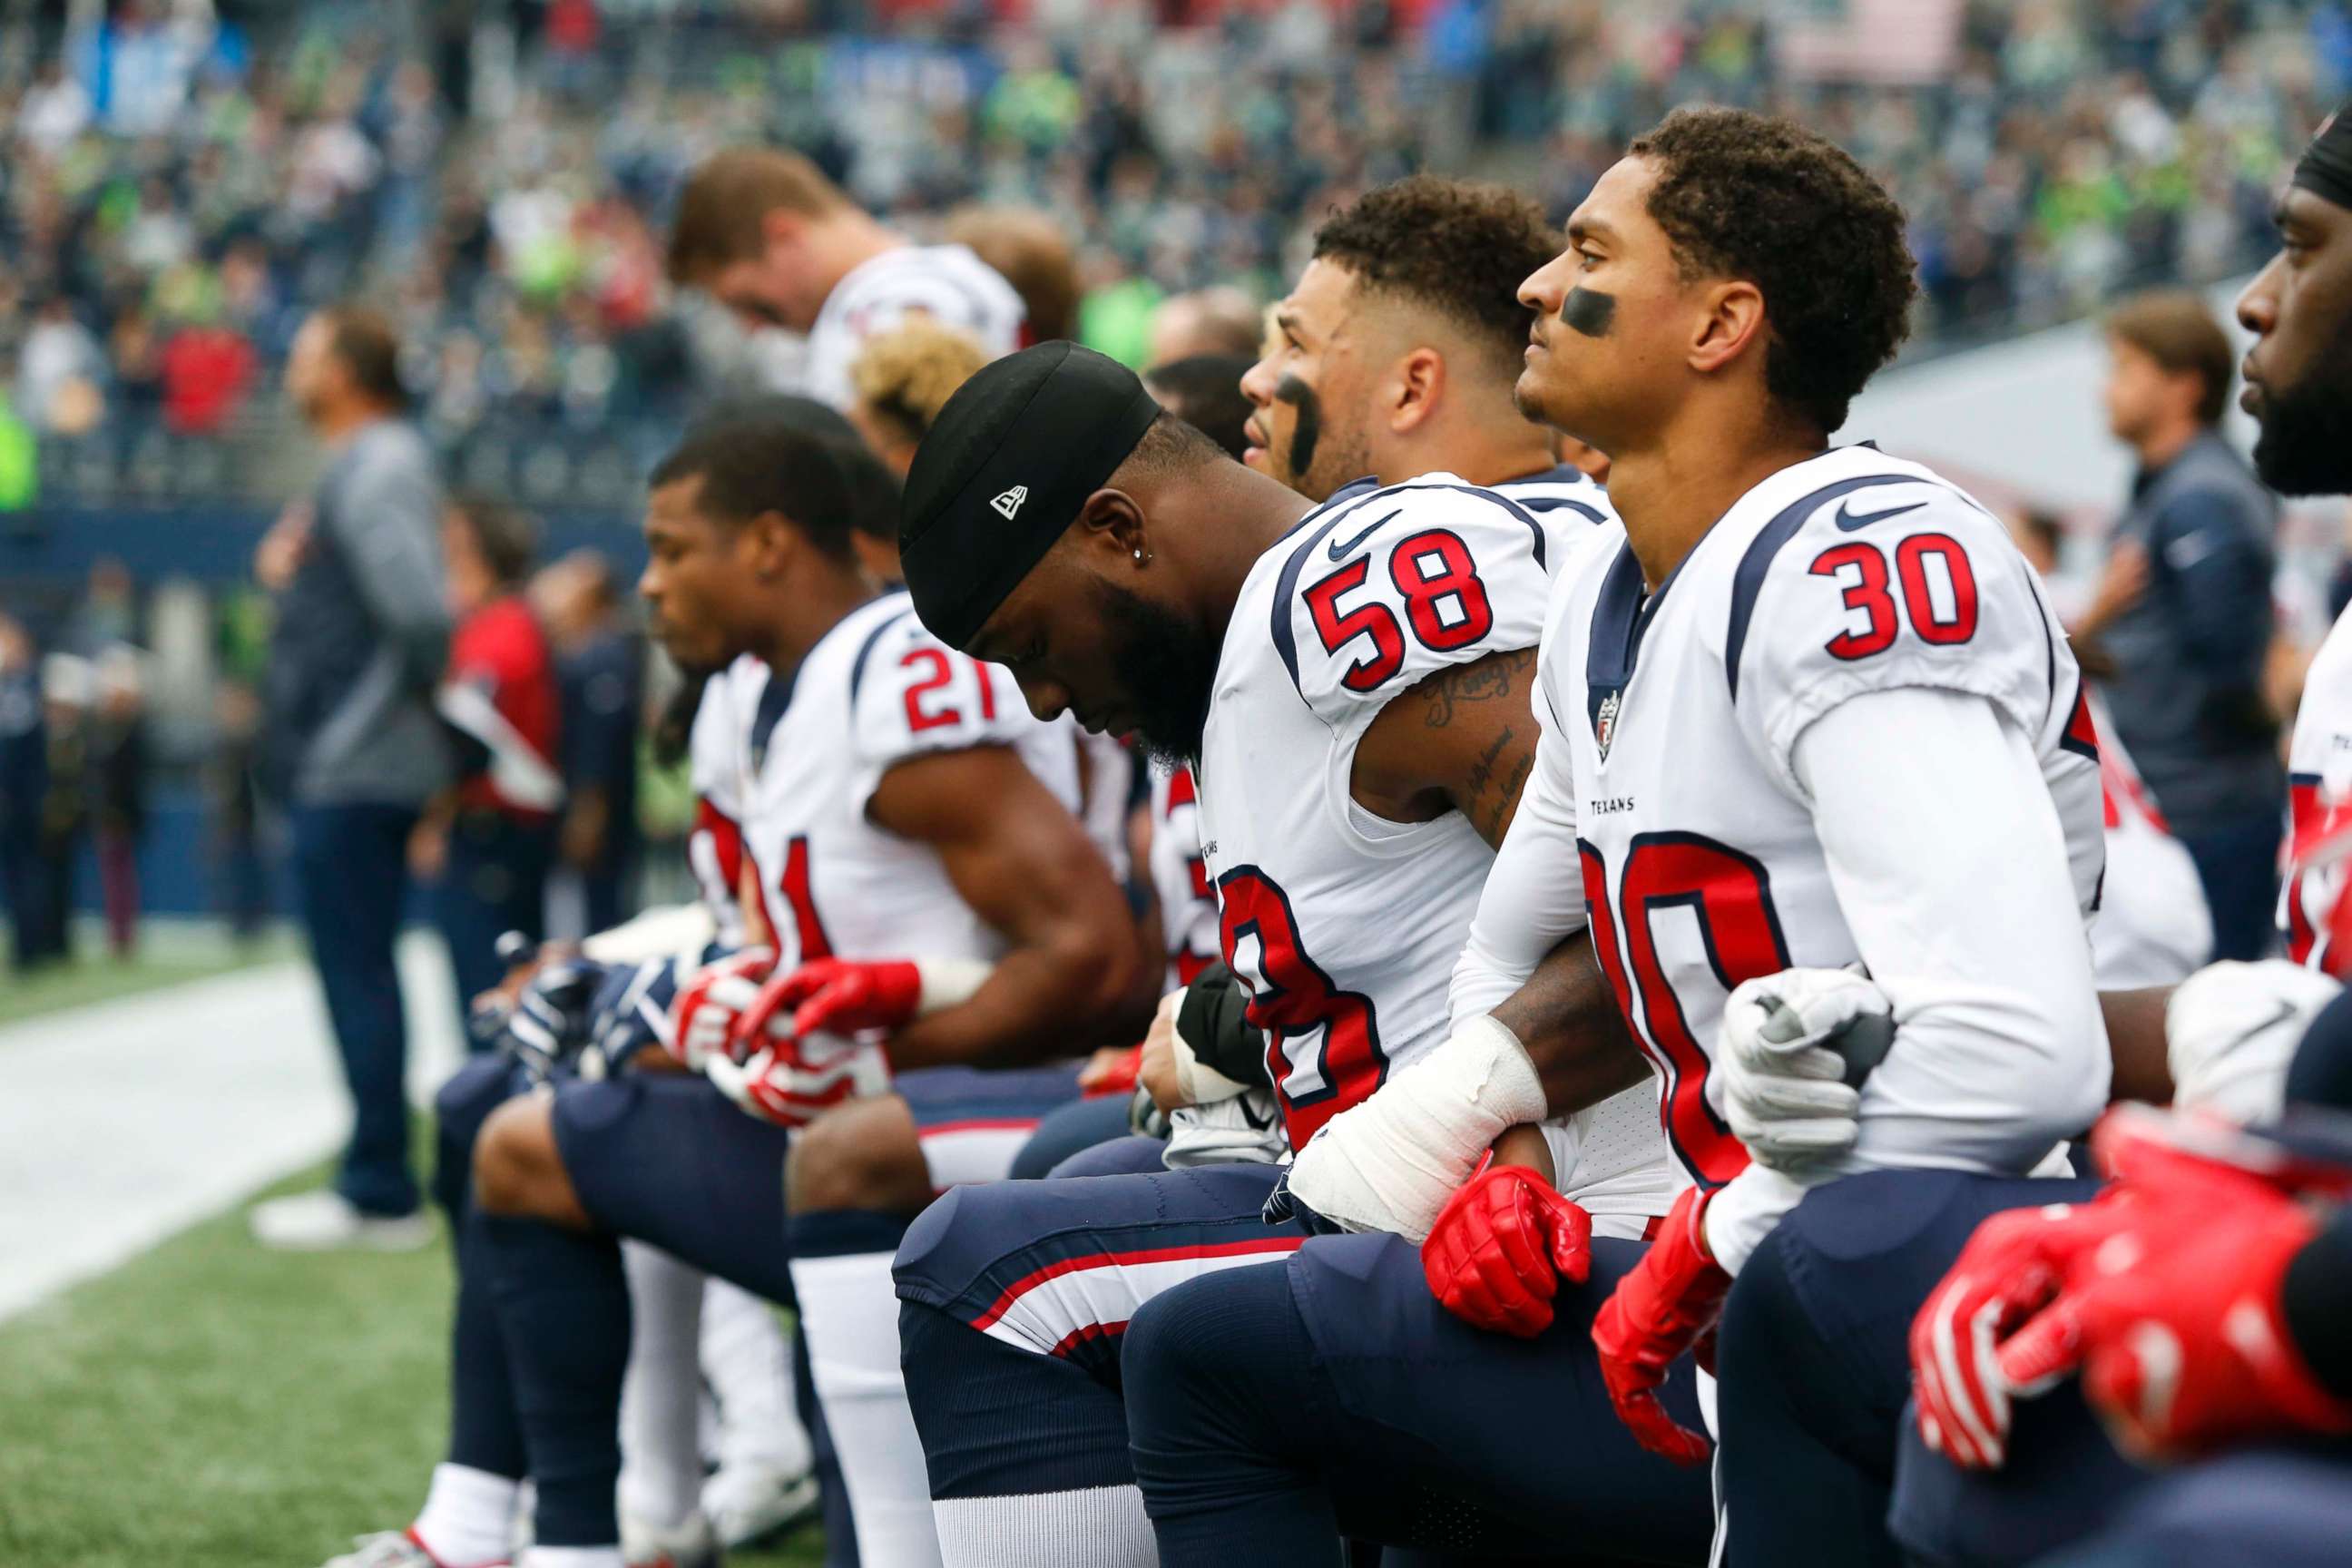 PHOTO: Houston Texans linebacker Lamarr Houston and cornerback Kevin Johnson kneel during the national anthem before kickoff against the Seattle Seahawks at CenturyLink Field in Seattle, Oct. 29, 2017.